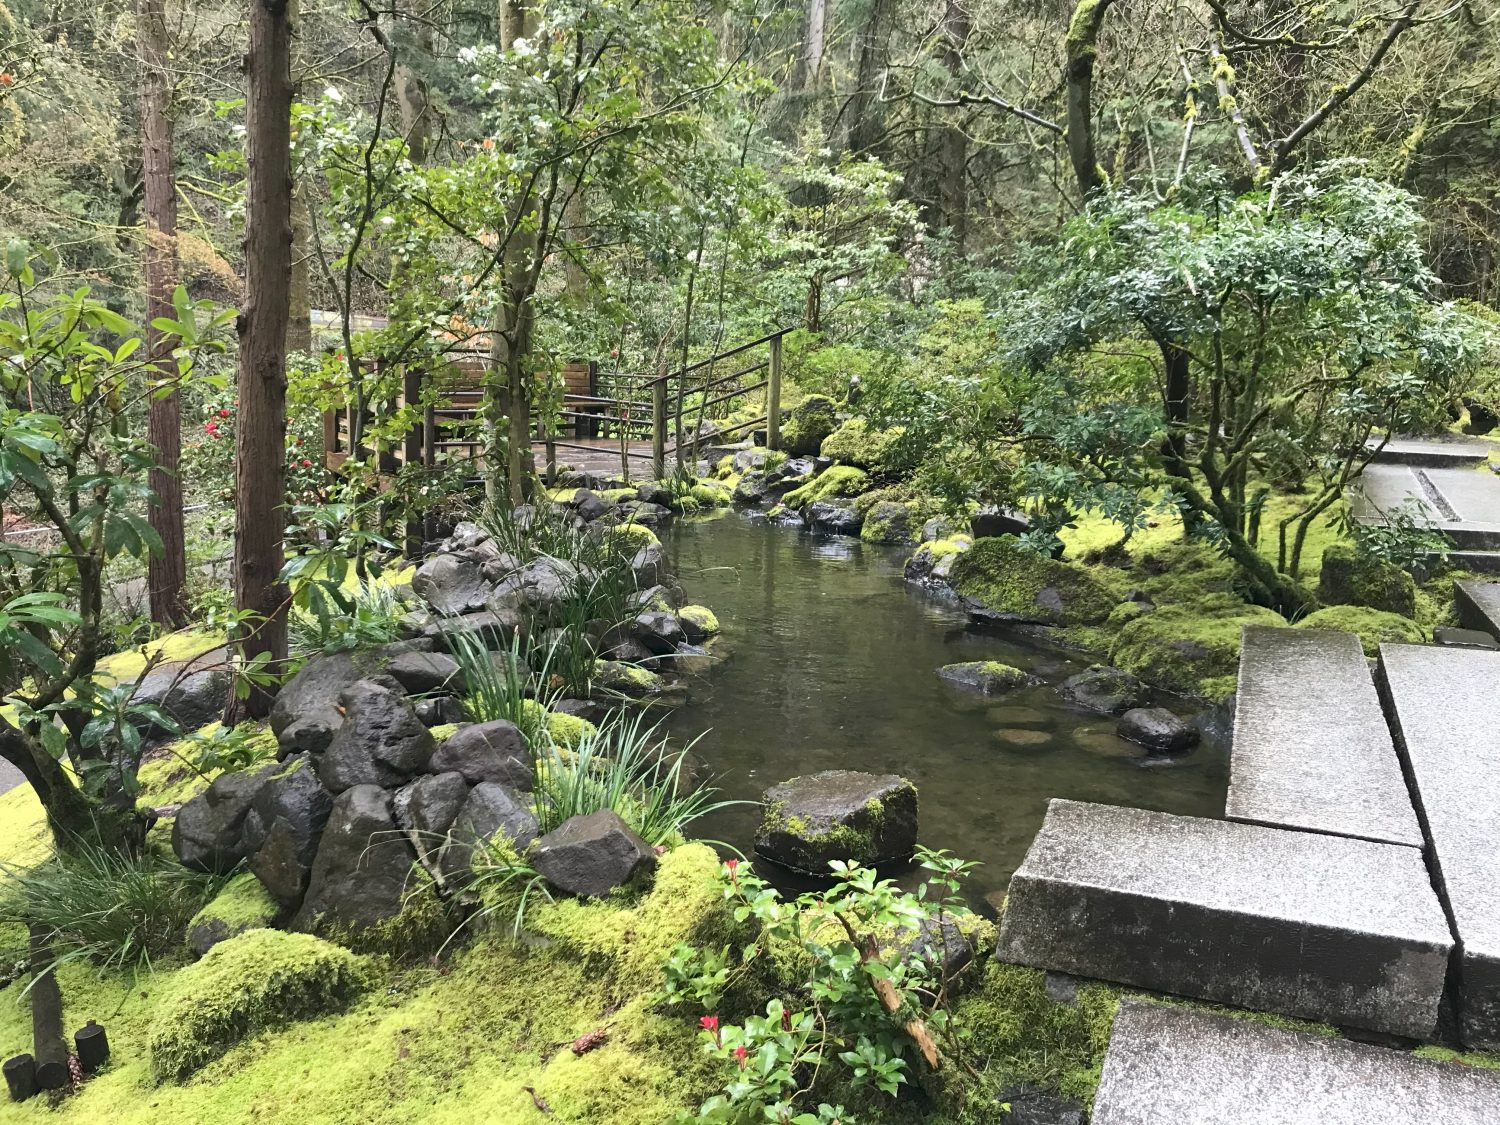 A small pond and lush greenery and stones